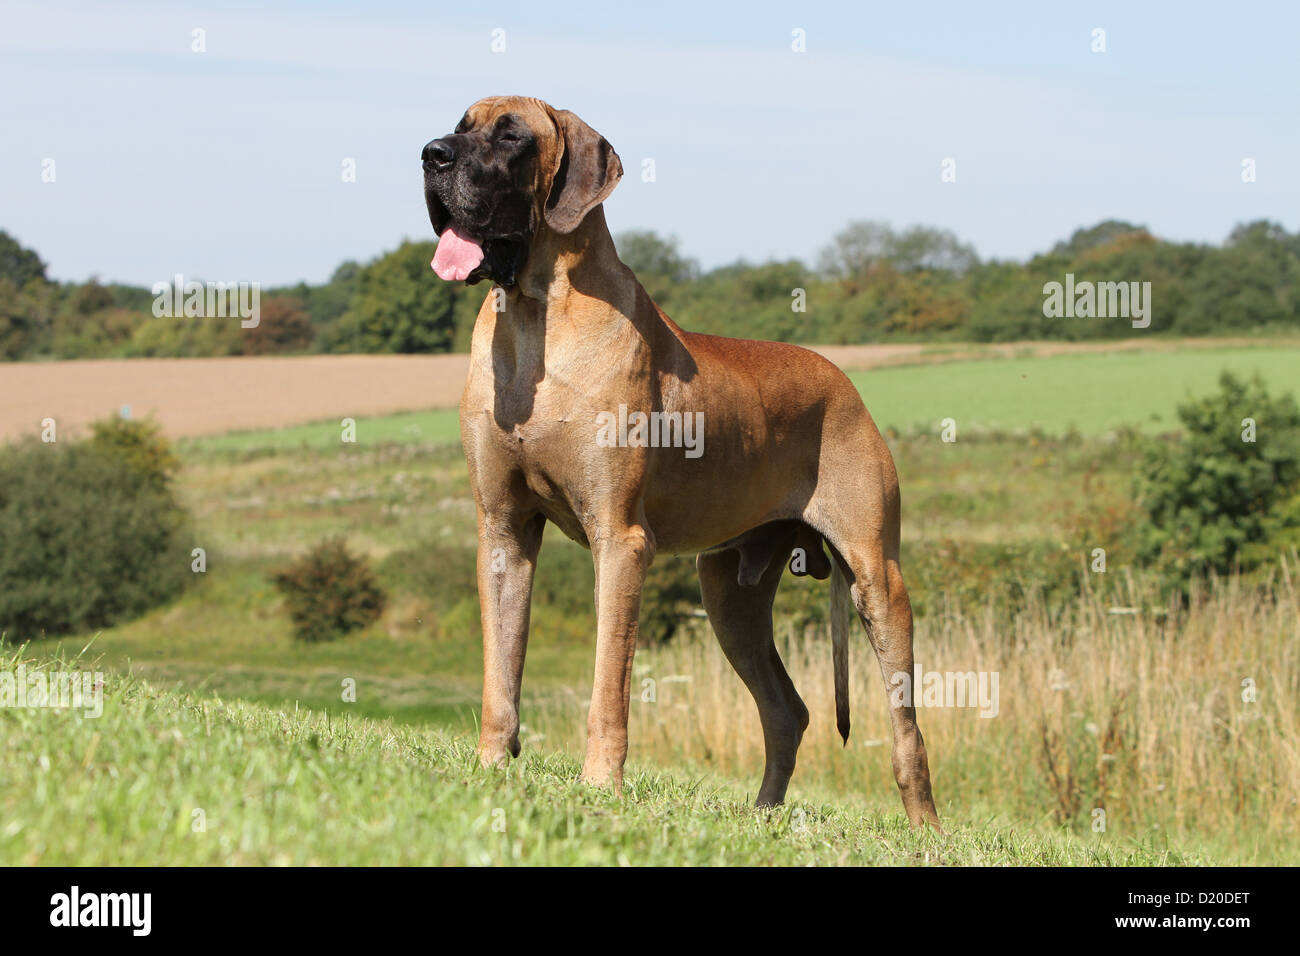 Dog Great Dane / Deutsche Dogge adult fawn standing Stock Photo